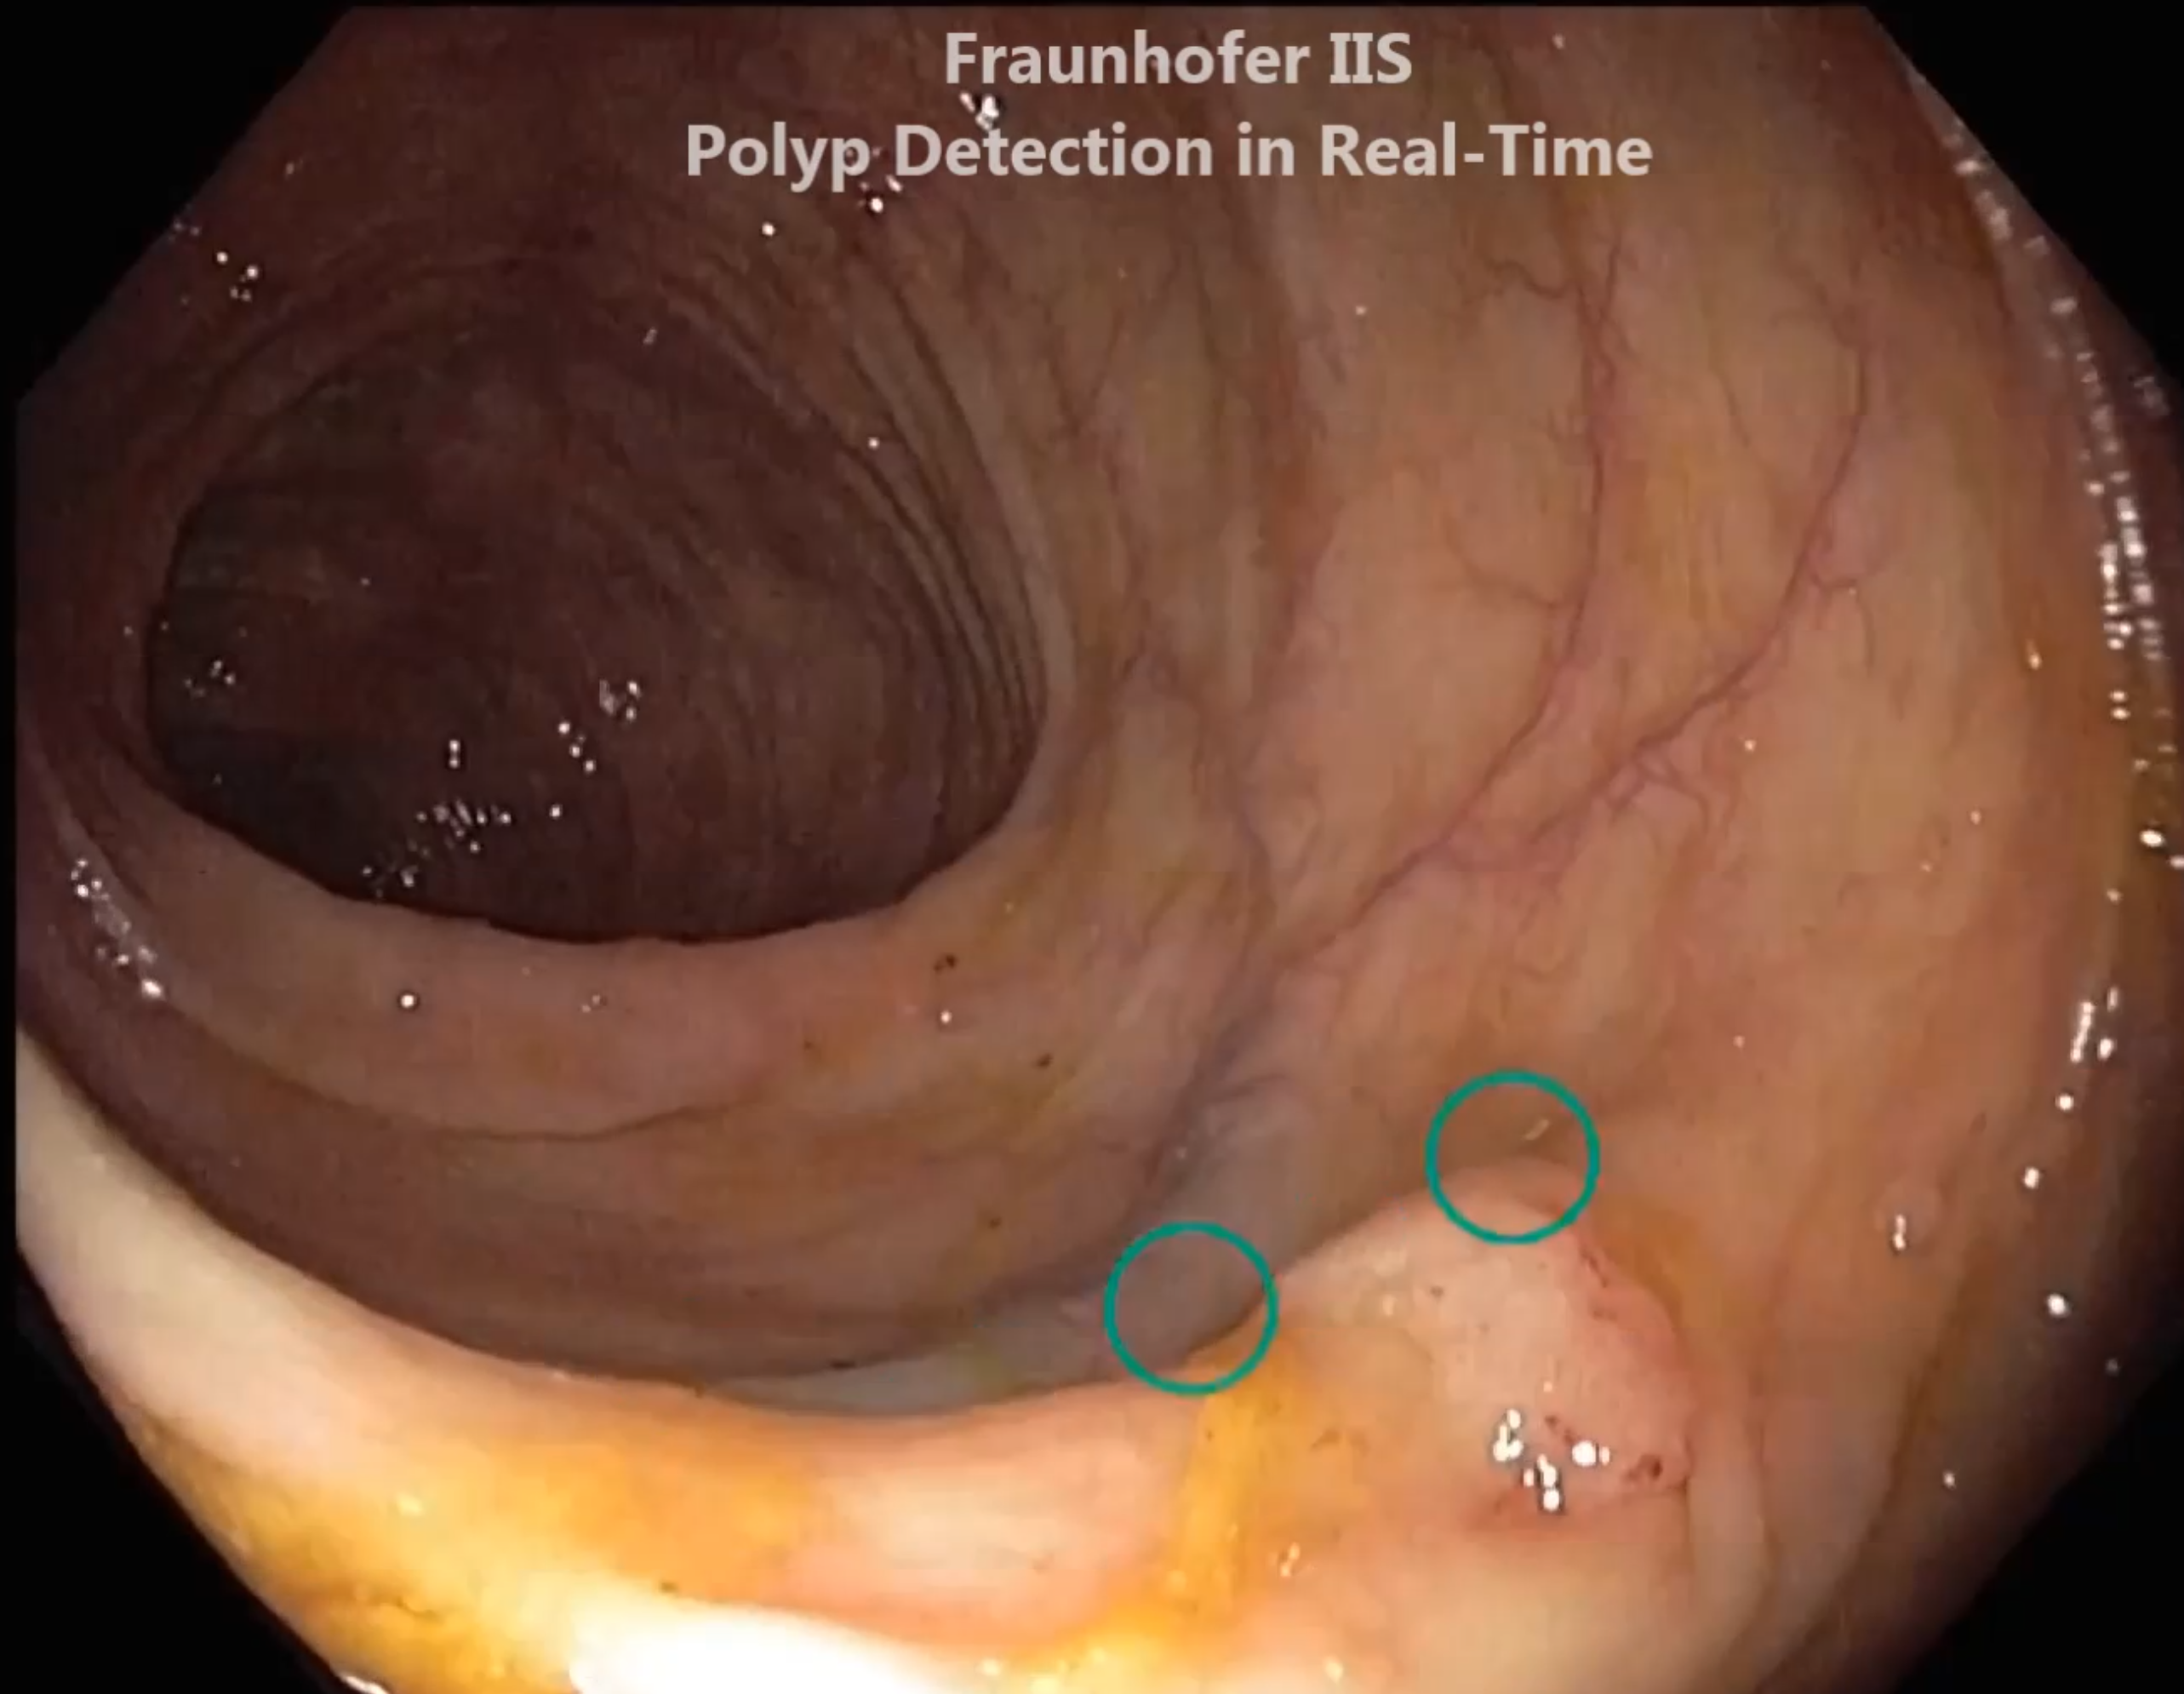 KoloPol recognizes polyps (indicated by the green circle) in real time.